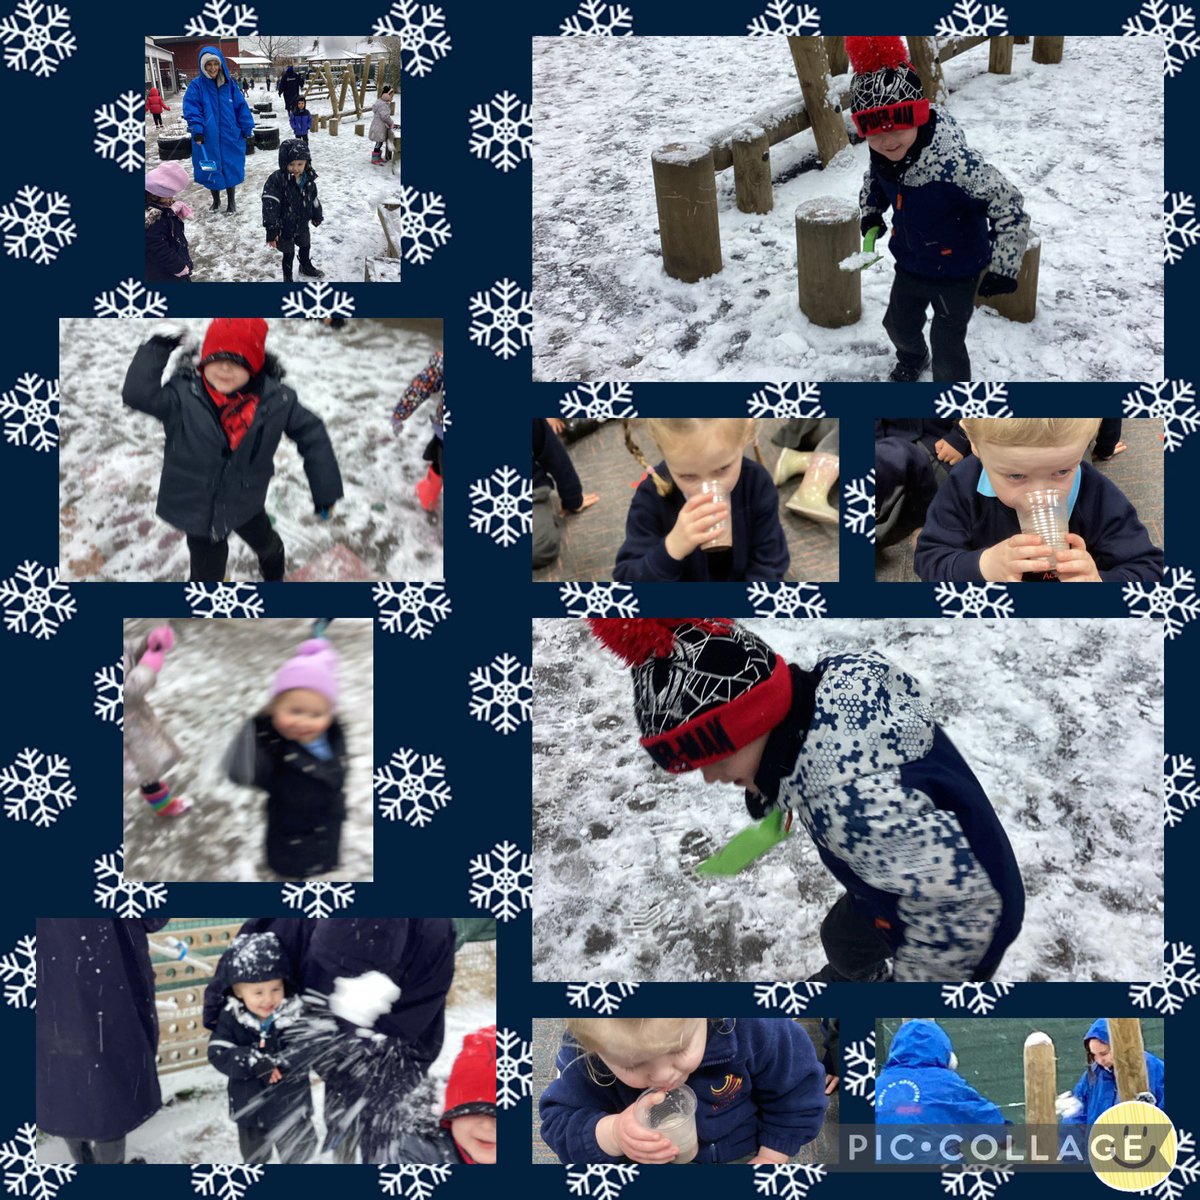 Fun in the snow this morning ☺️❄️ We enjoyed a hot chocolate to warm us up after snowball fights and snowman building ☃️🌨️ #exploring #snowfun @Inspire_Ashton @TrustVictorious